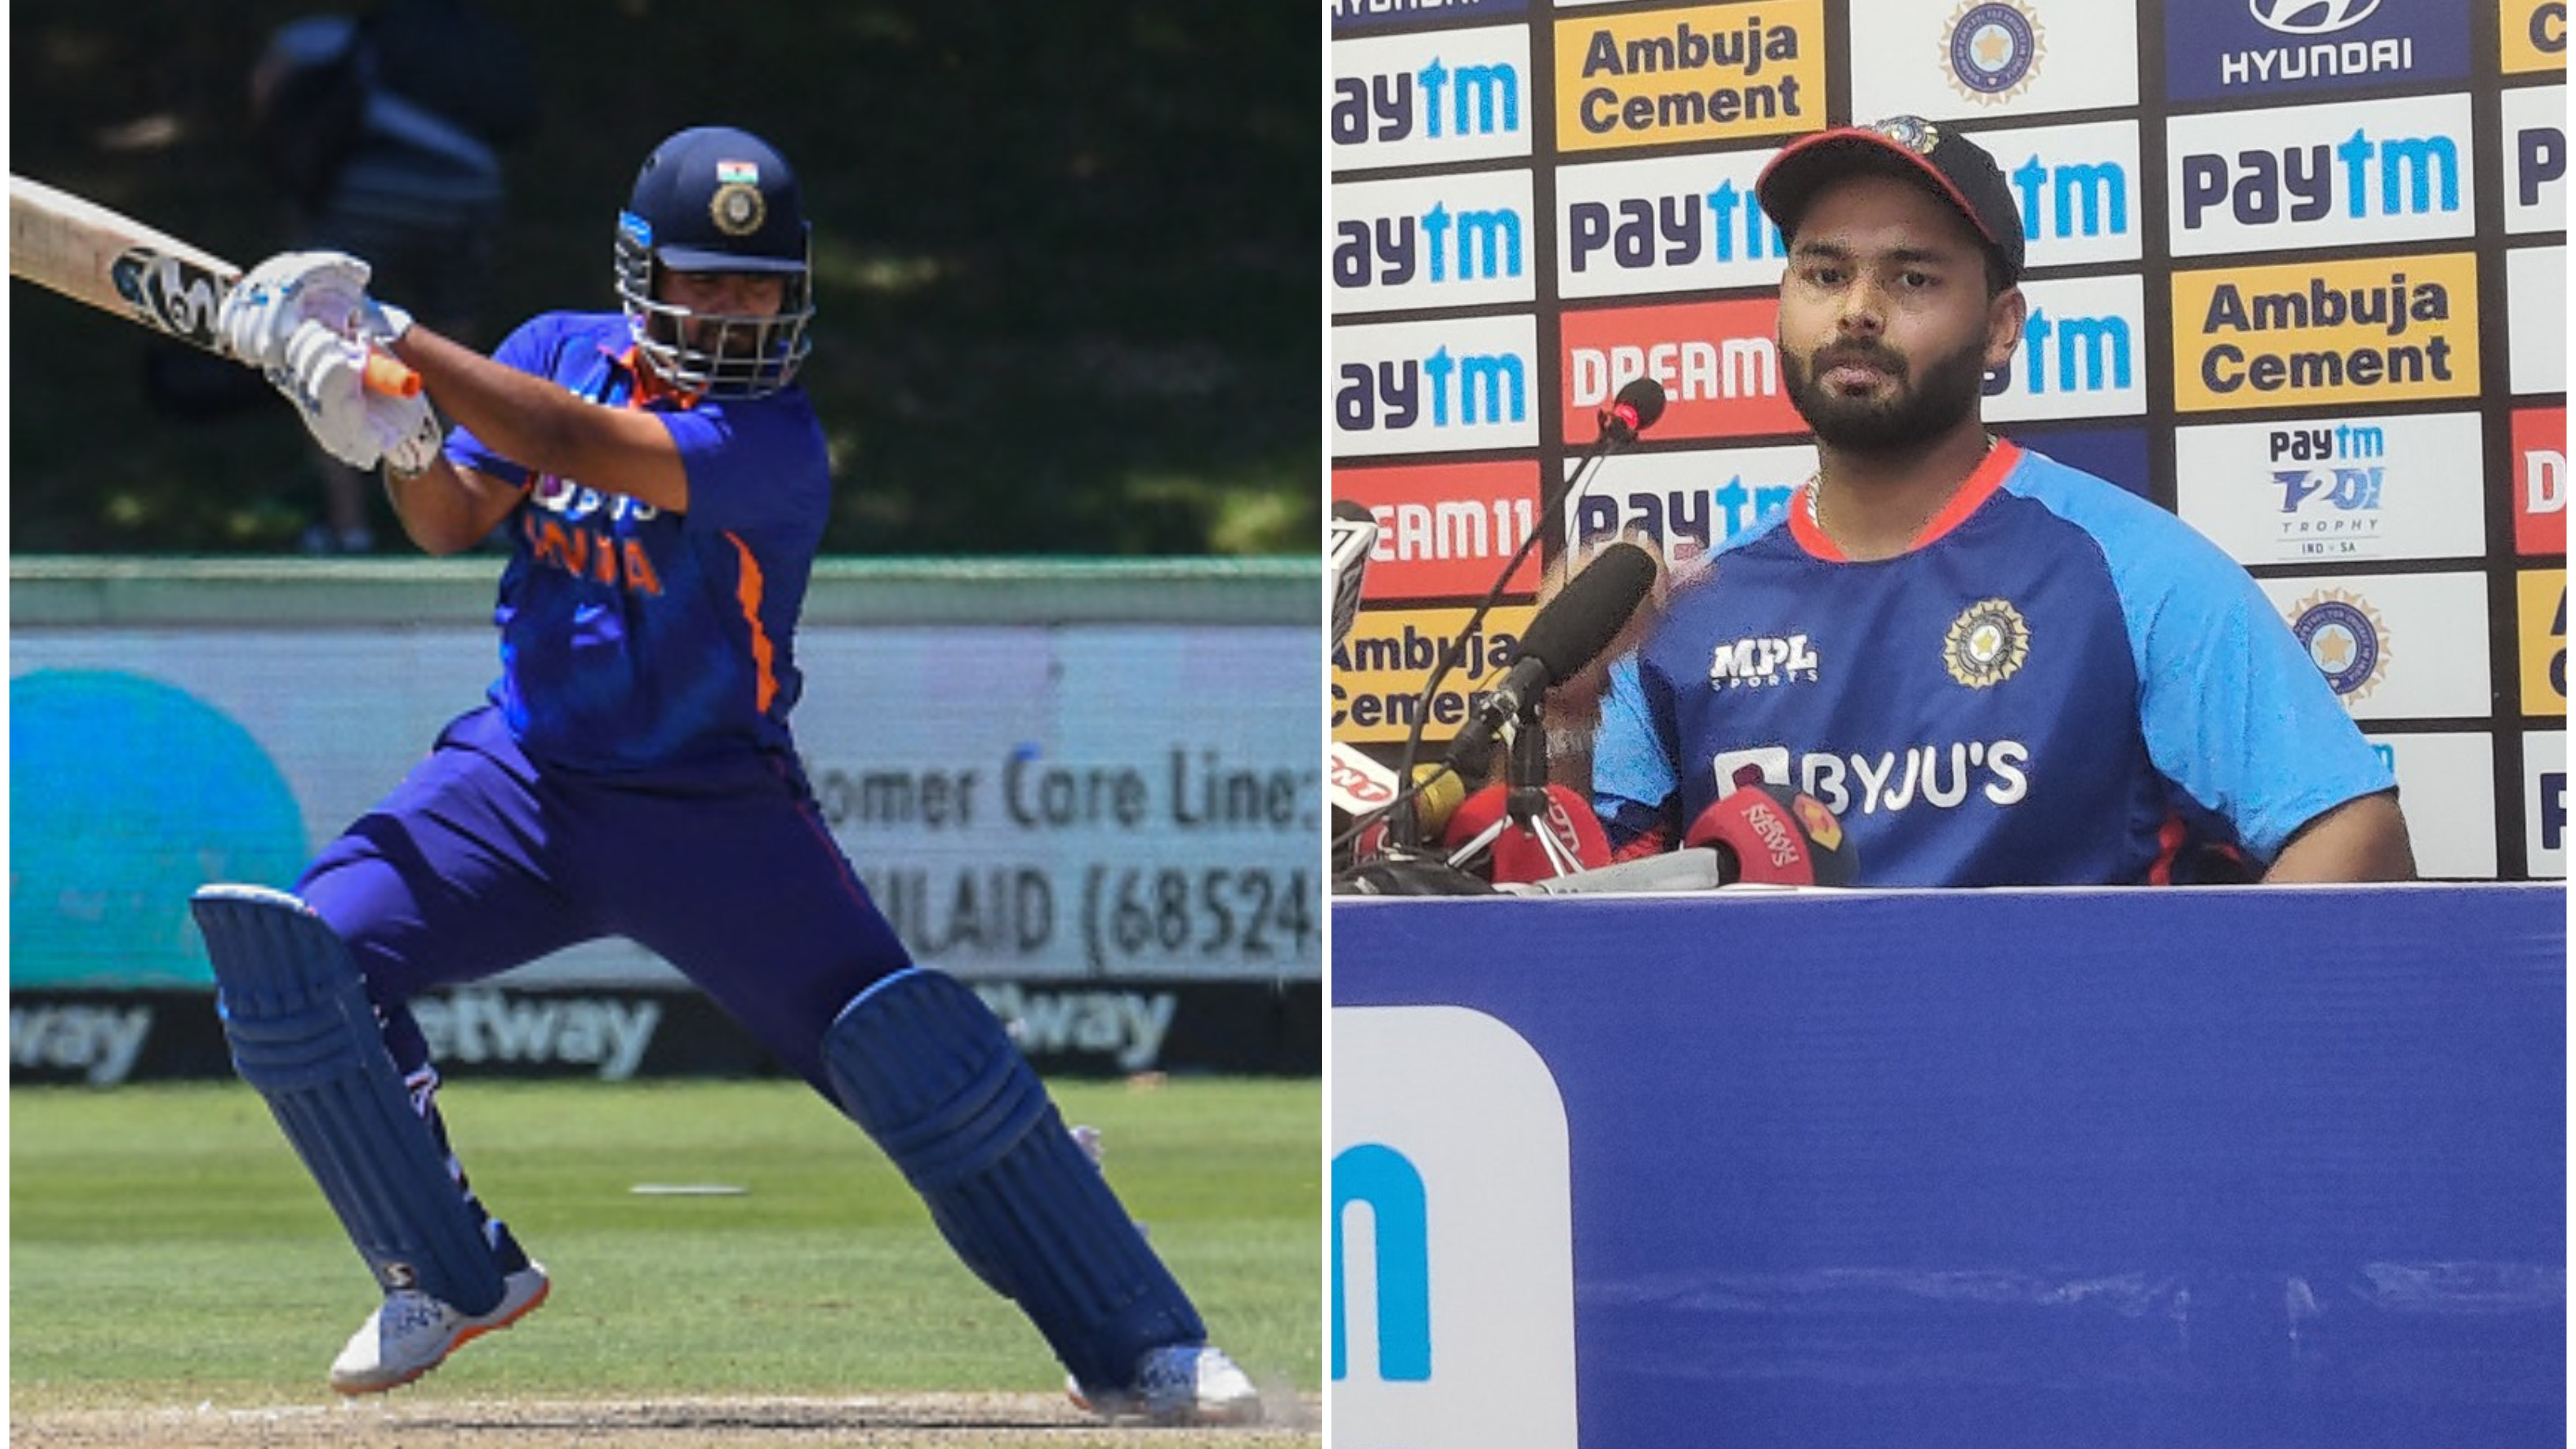 IND v SA 2022: “Didn’t come under very good circumstances”, Rishabh Pant after being named India’s T20I captain